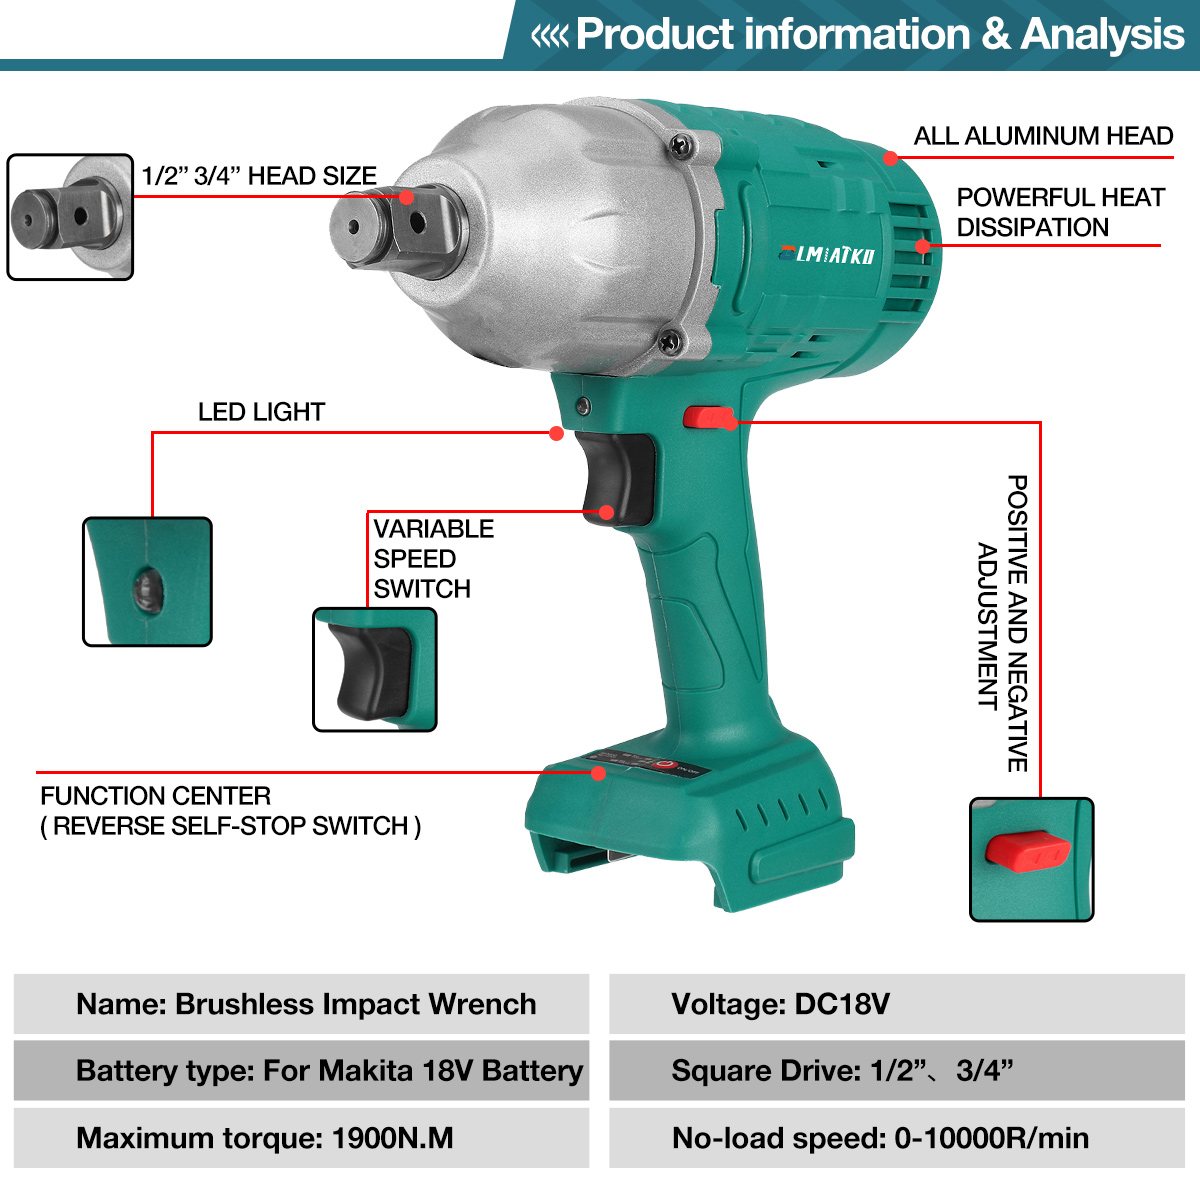 BLMIATKO-18V-1900Nm-Electric-Brushless-Impact-Wrench-Rechargeable-Woodworking-Maintenance-Tool-1943538-9